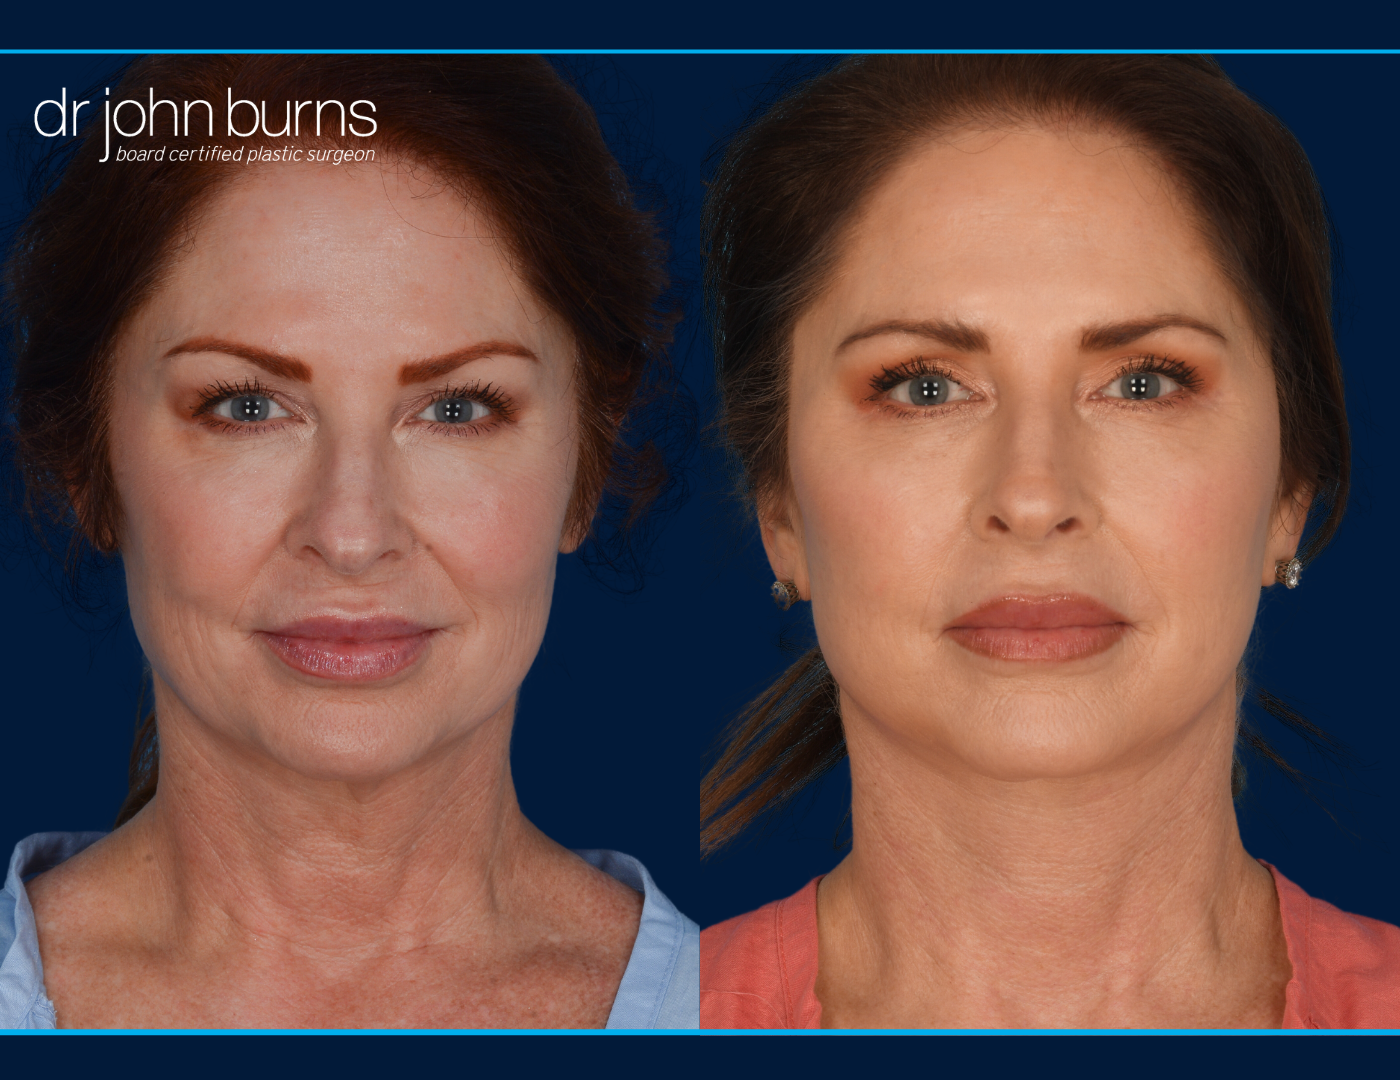 Facelift Before and After with Facial Fat Grafting | Dallas Facelift | Dr. John Burns